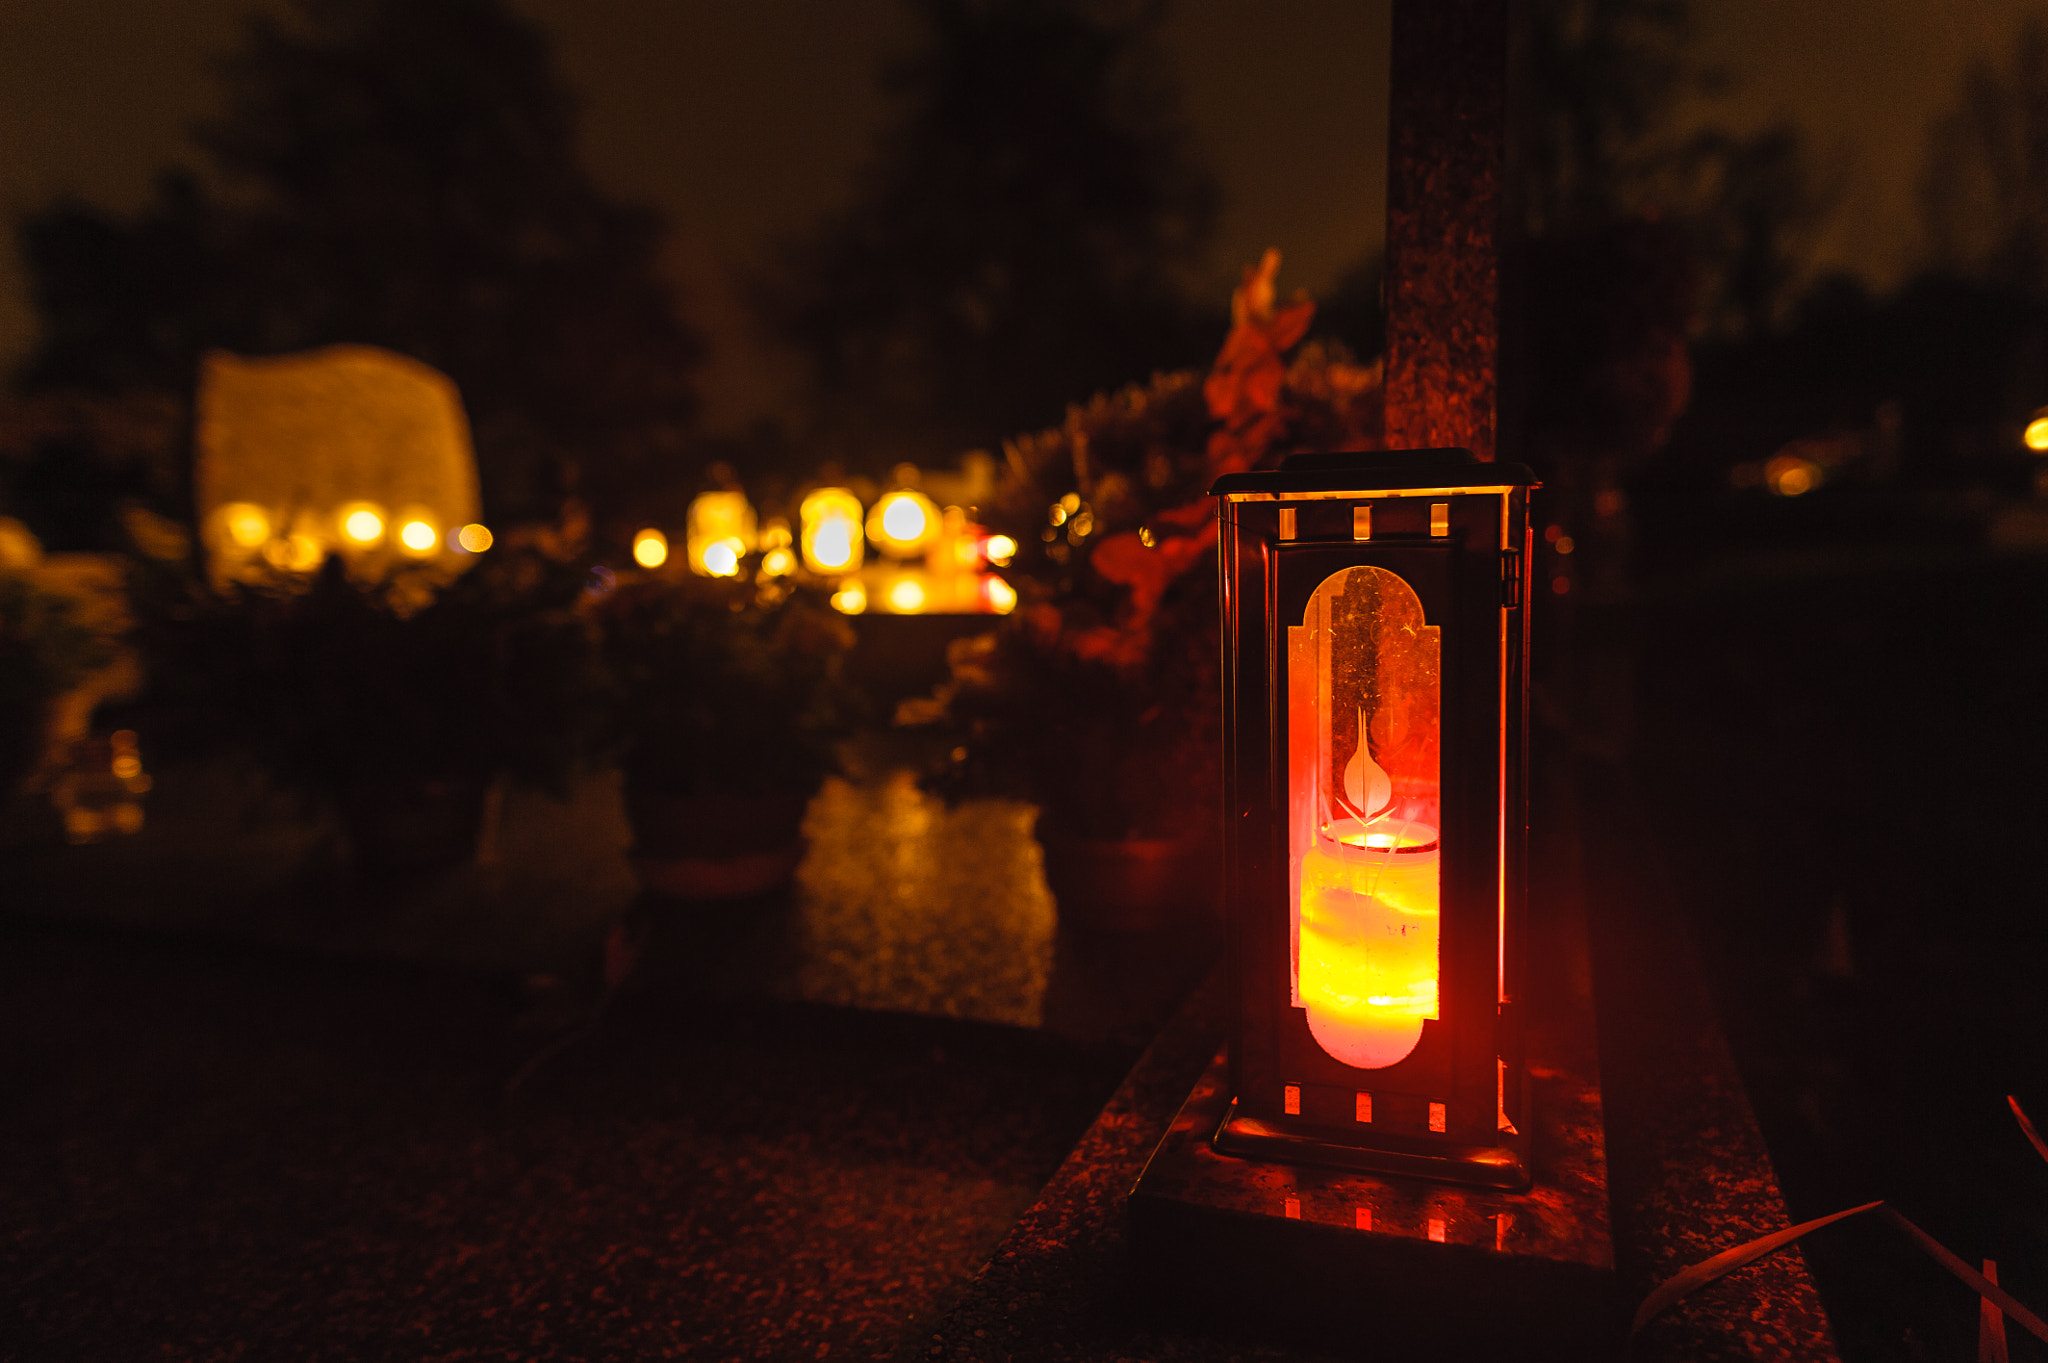 Nikon D700 sample photo. Grave candles on cemetery at night.deceased holiday in poland. photography